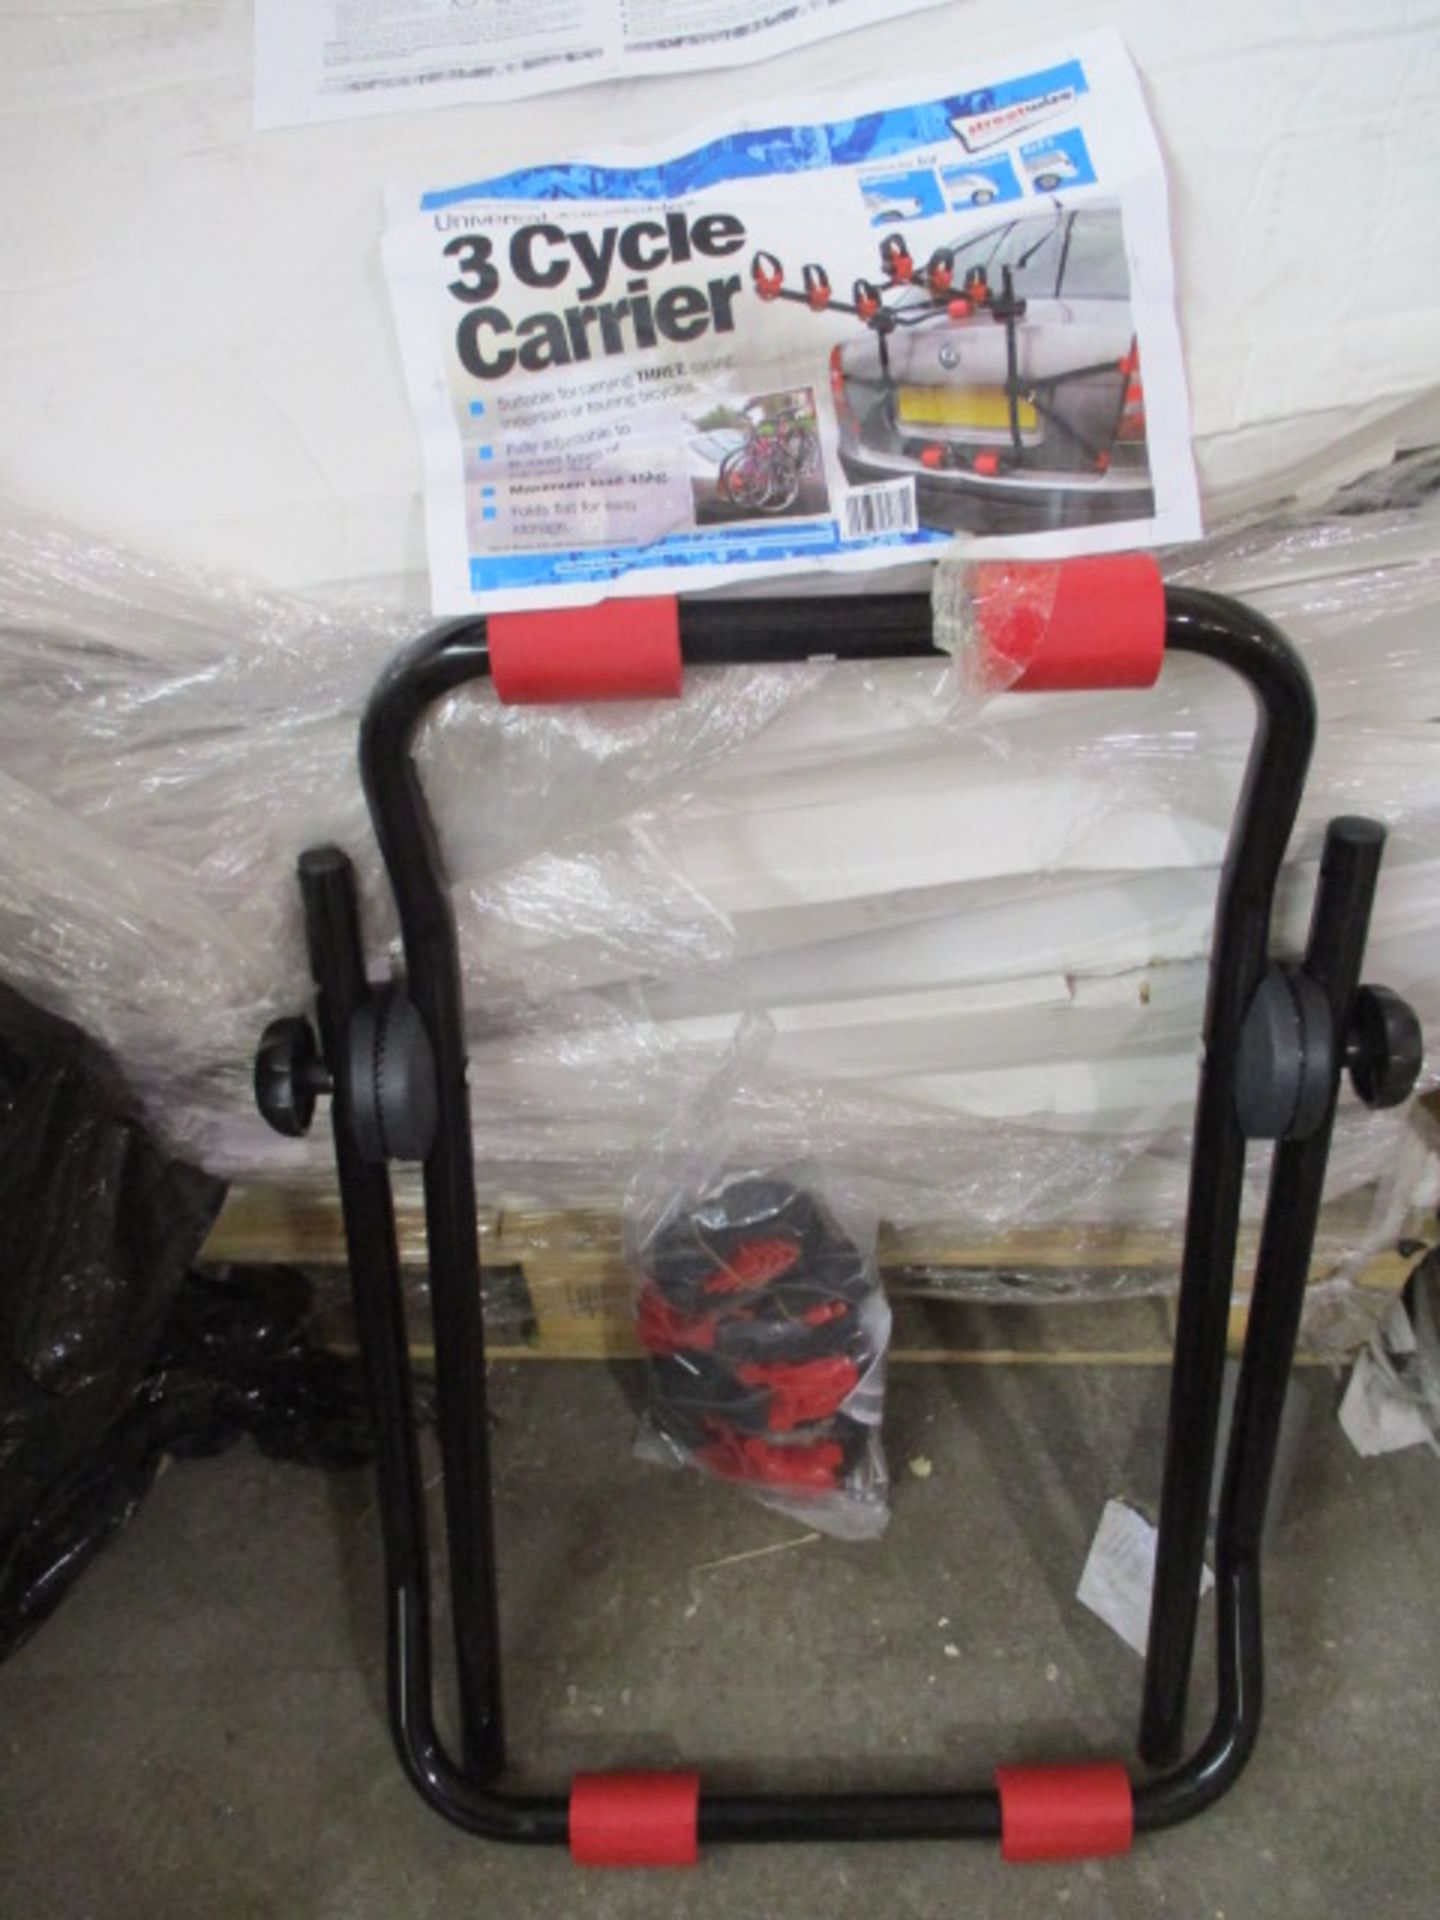 5pcs plain packaging 3 x cycle bike carrier rrp 39.99. each - 5 pcs in lot - will include fittings